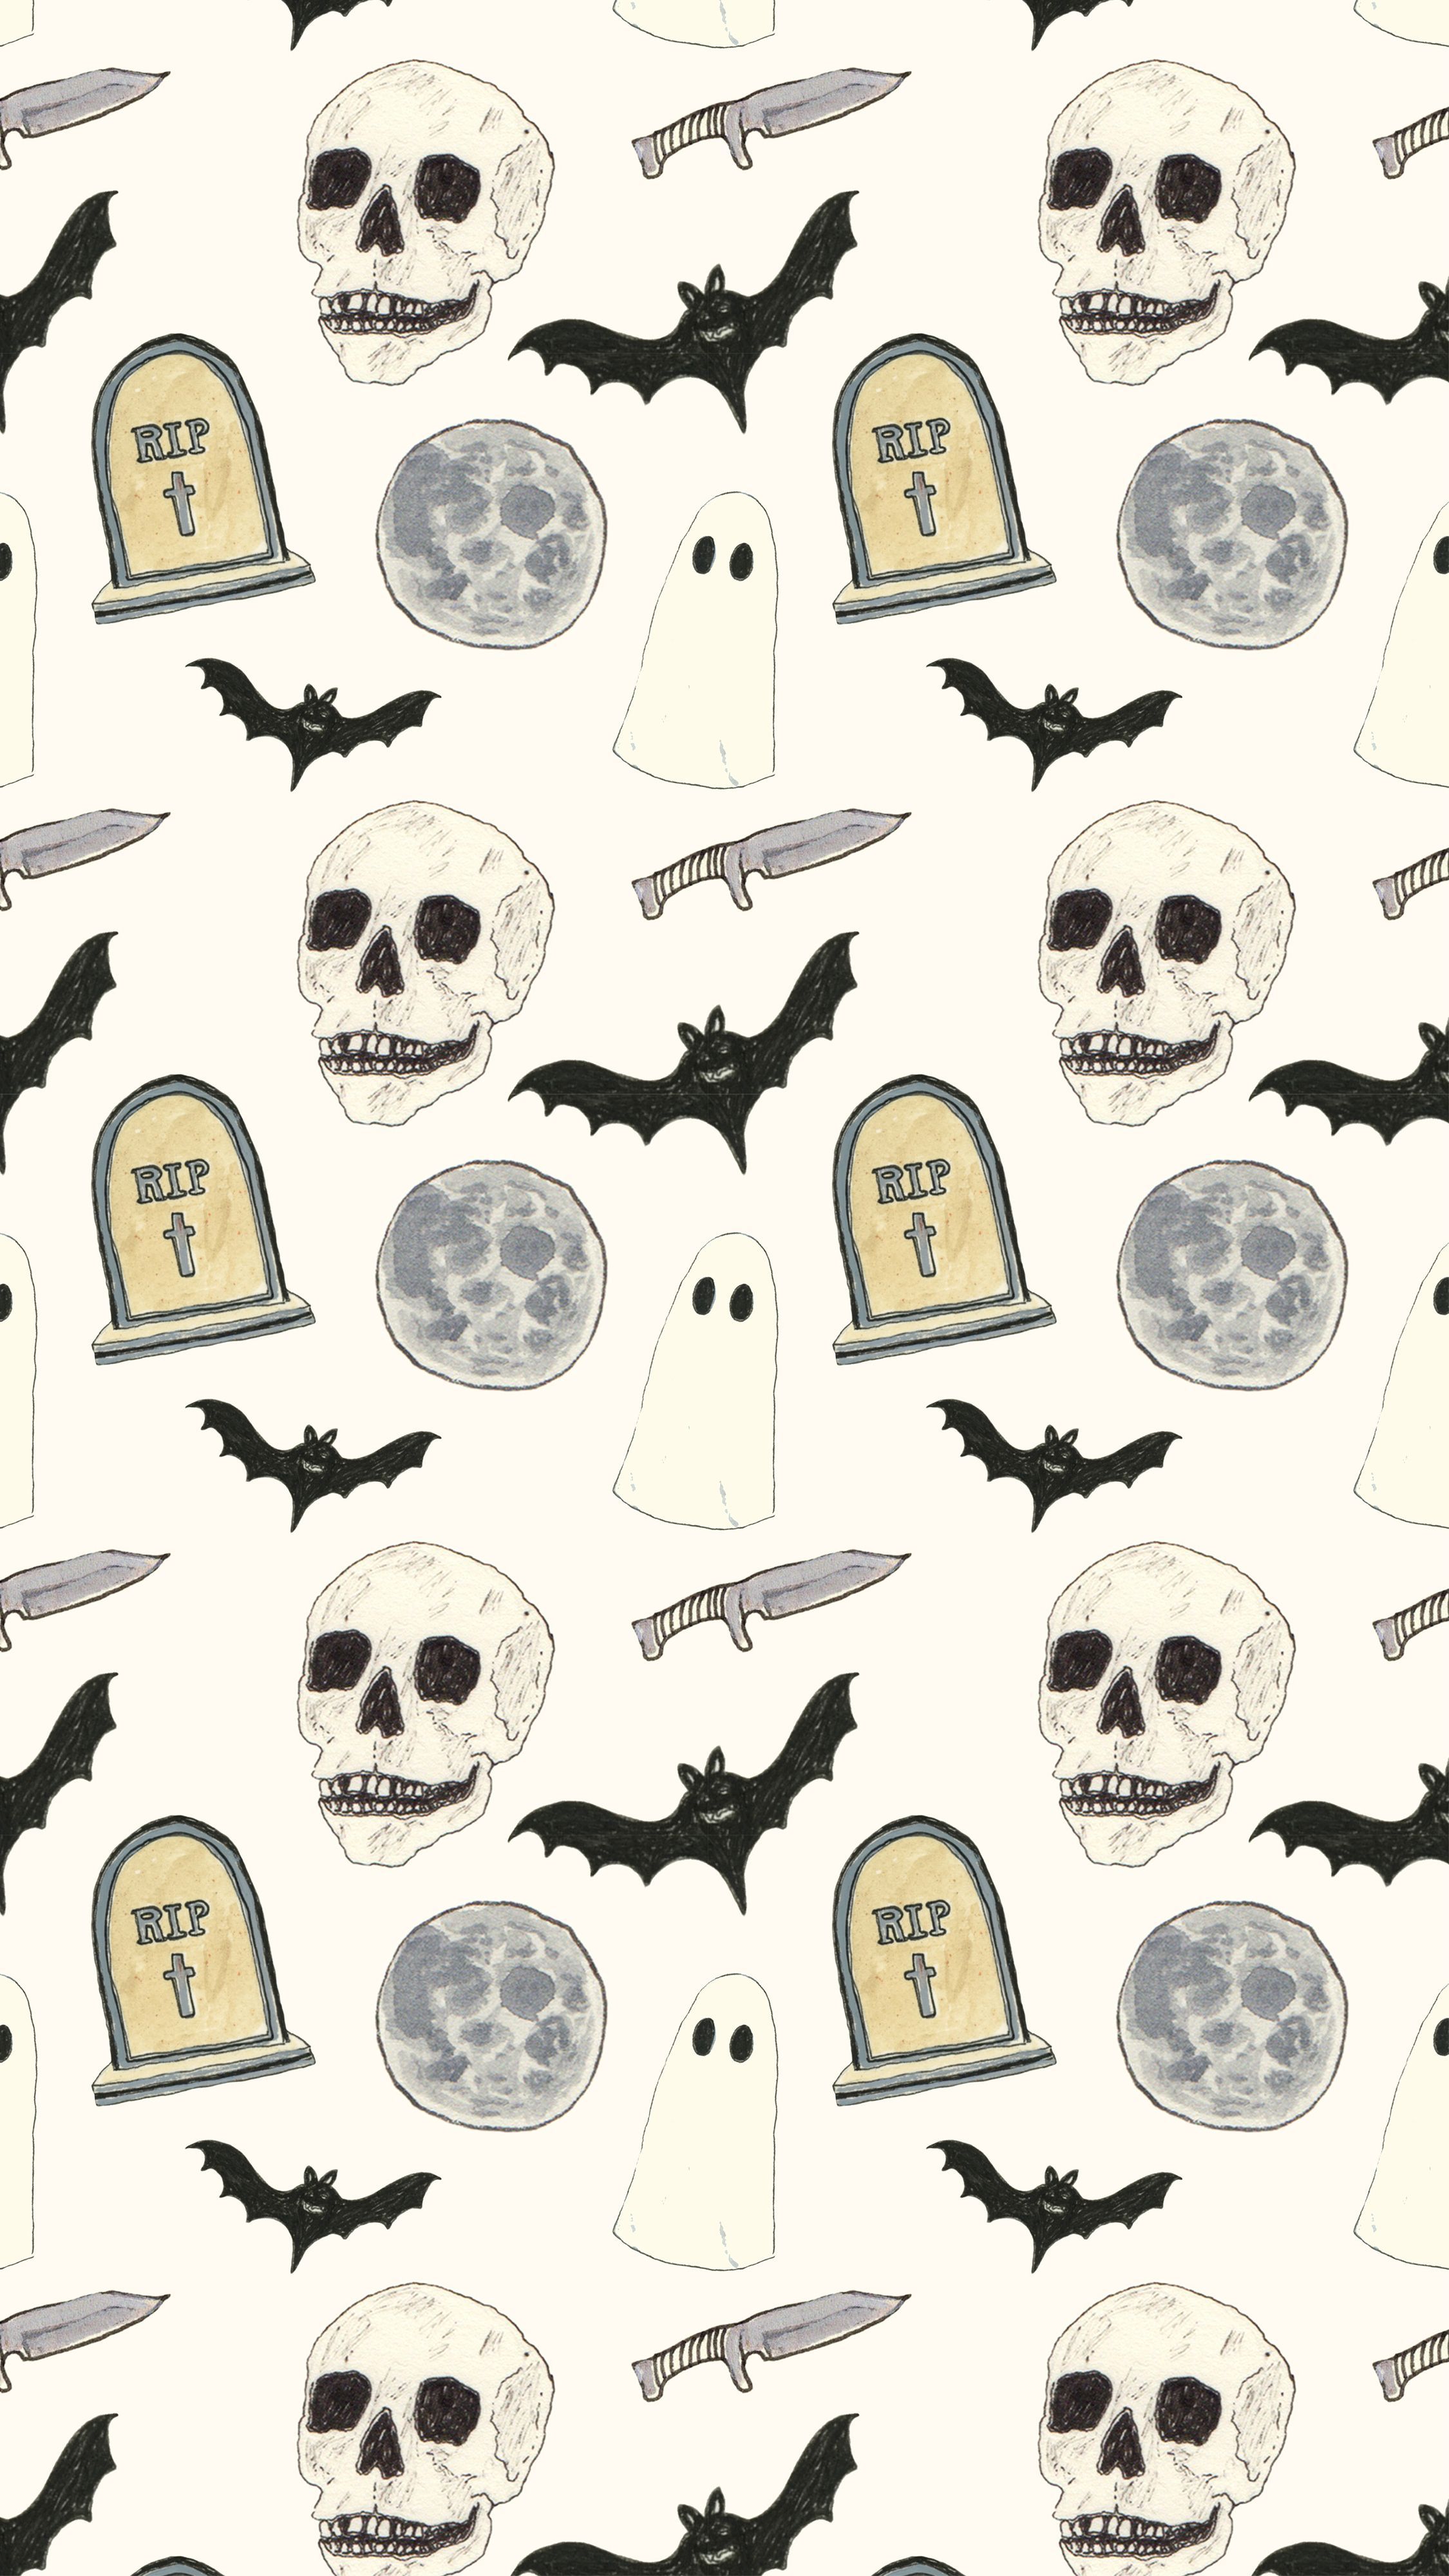 A pattern of skulls, bats, and tombstones on a cream background. - Gothic, creepy, spooky